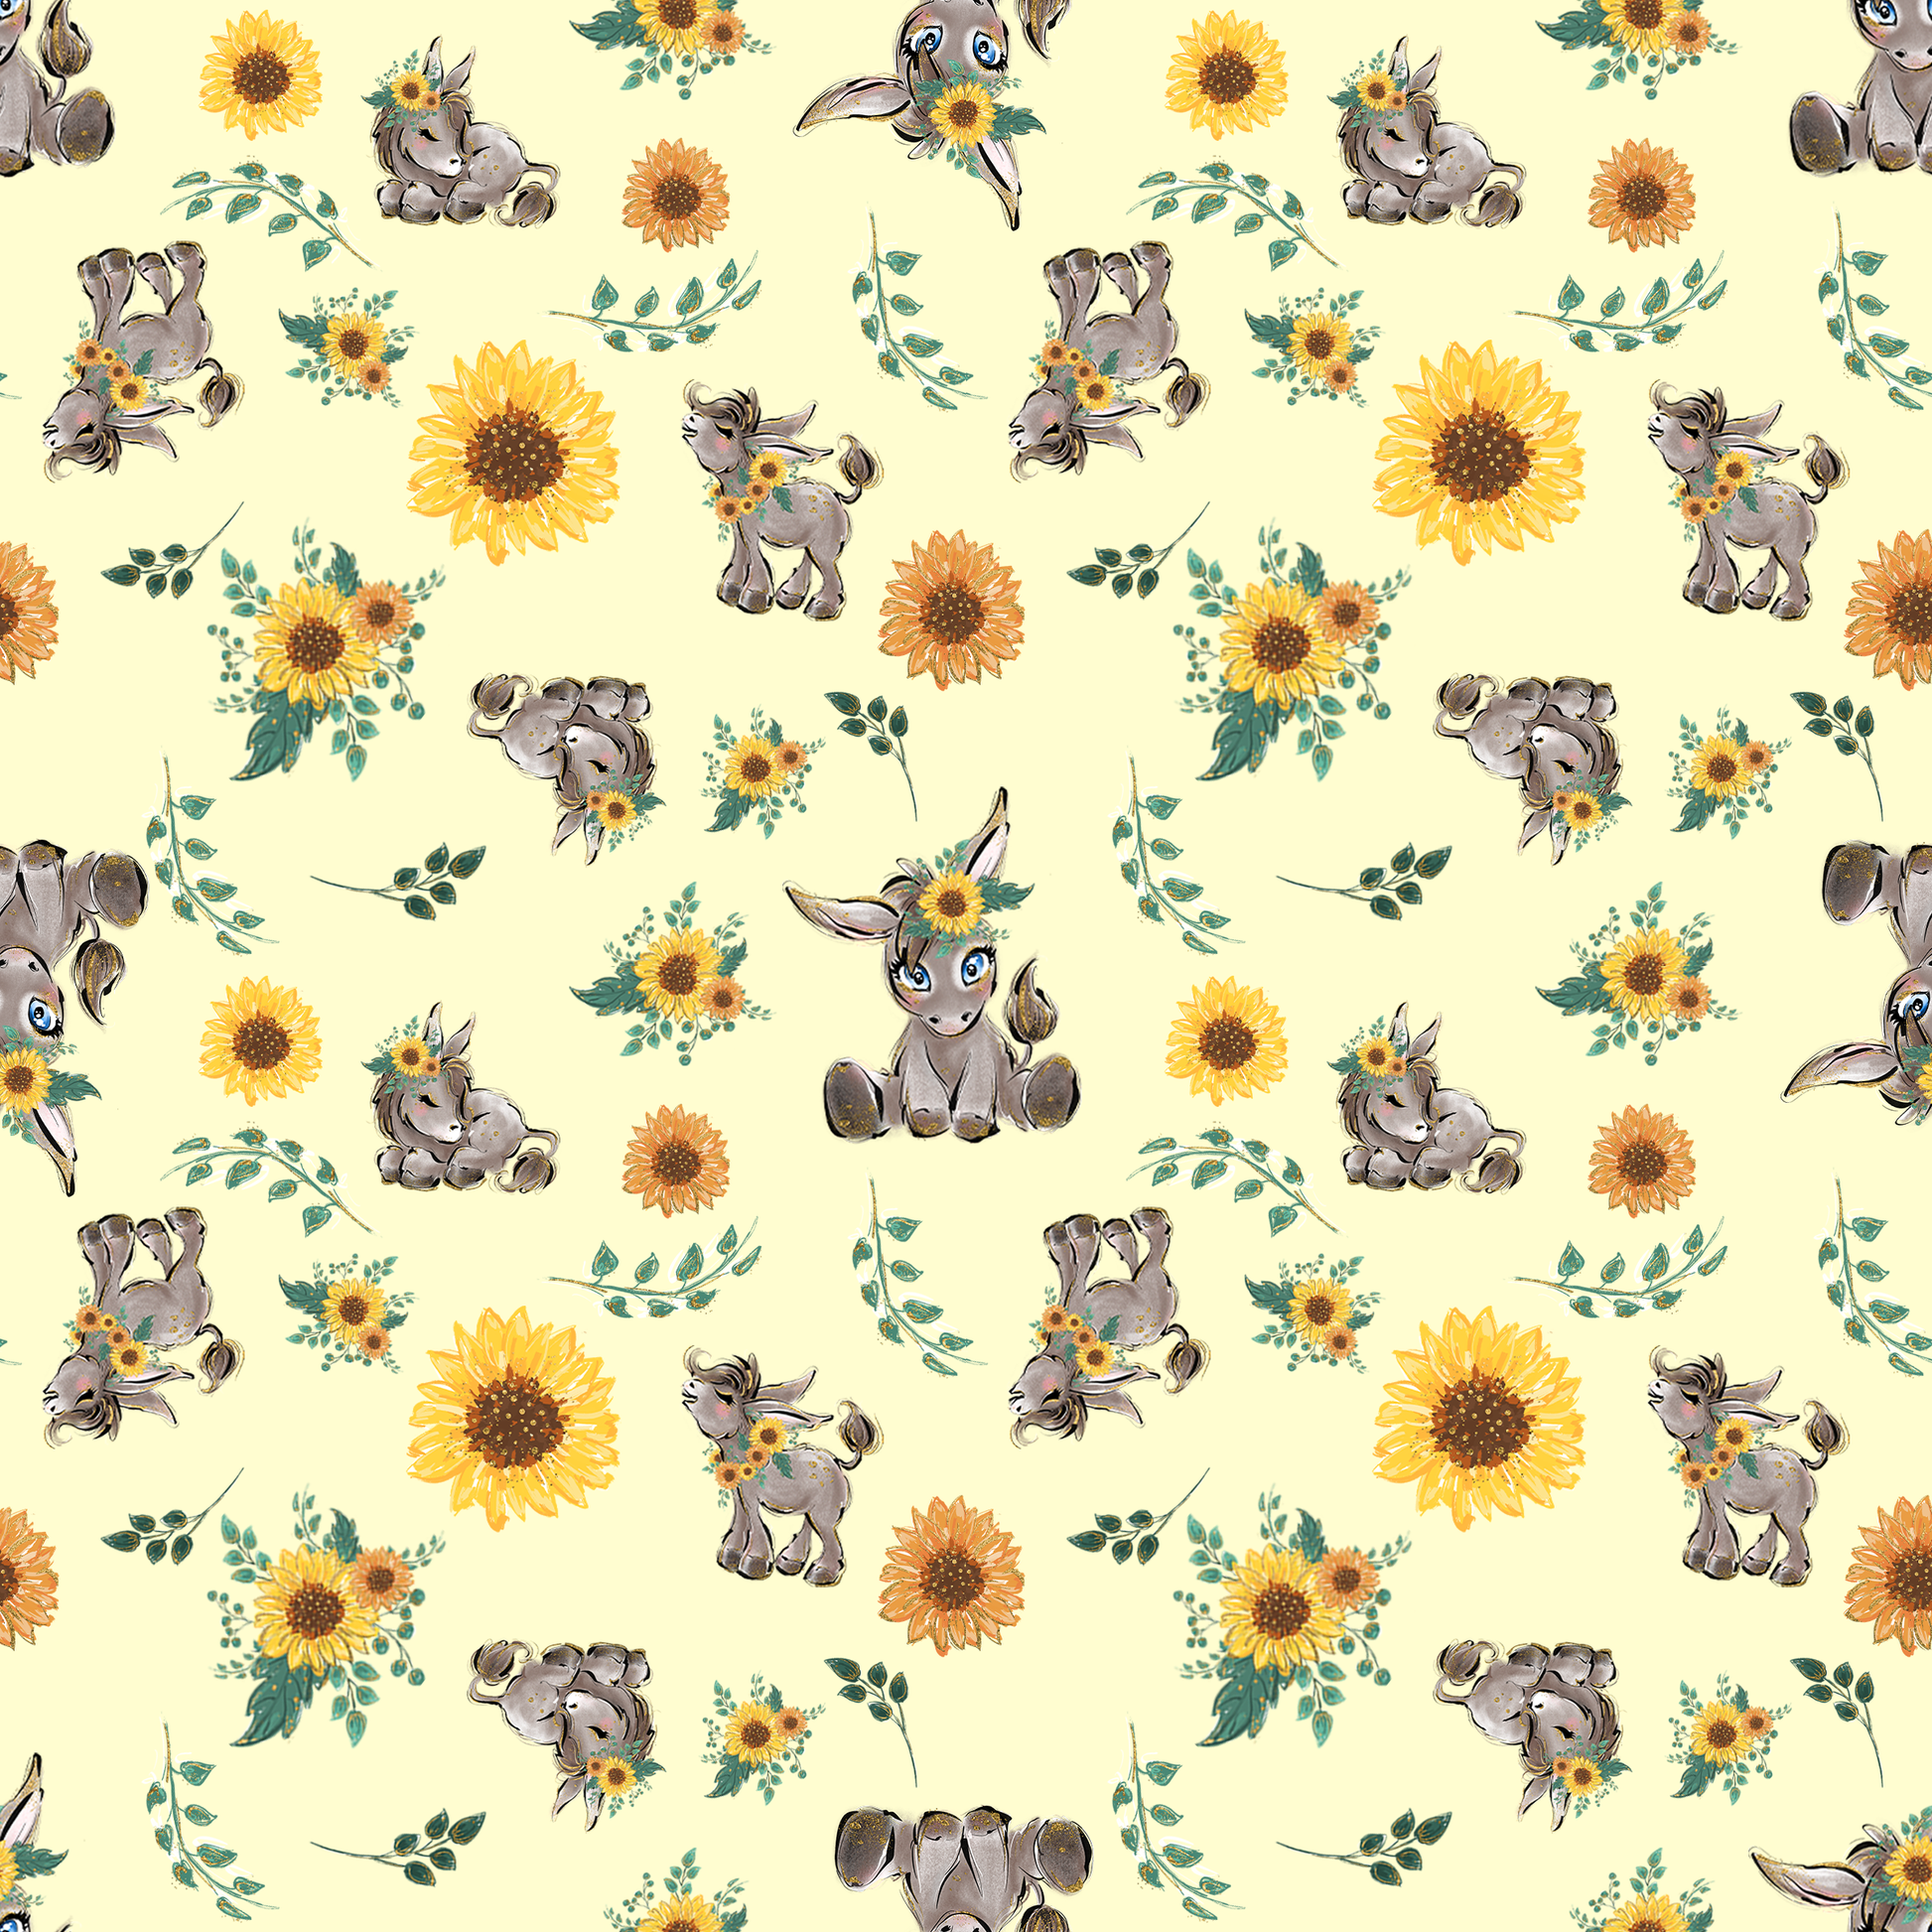 donkey and yellow flowers pattern for candie cloth nappies